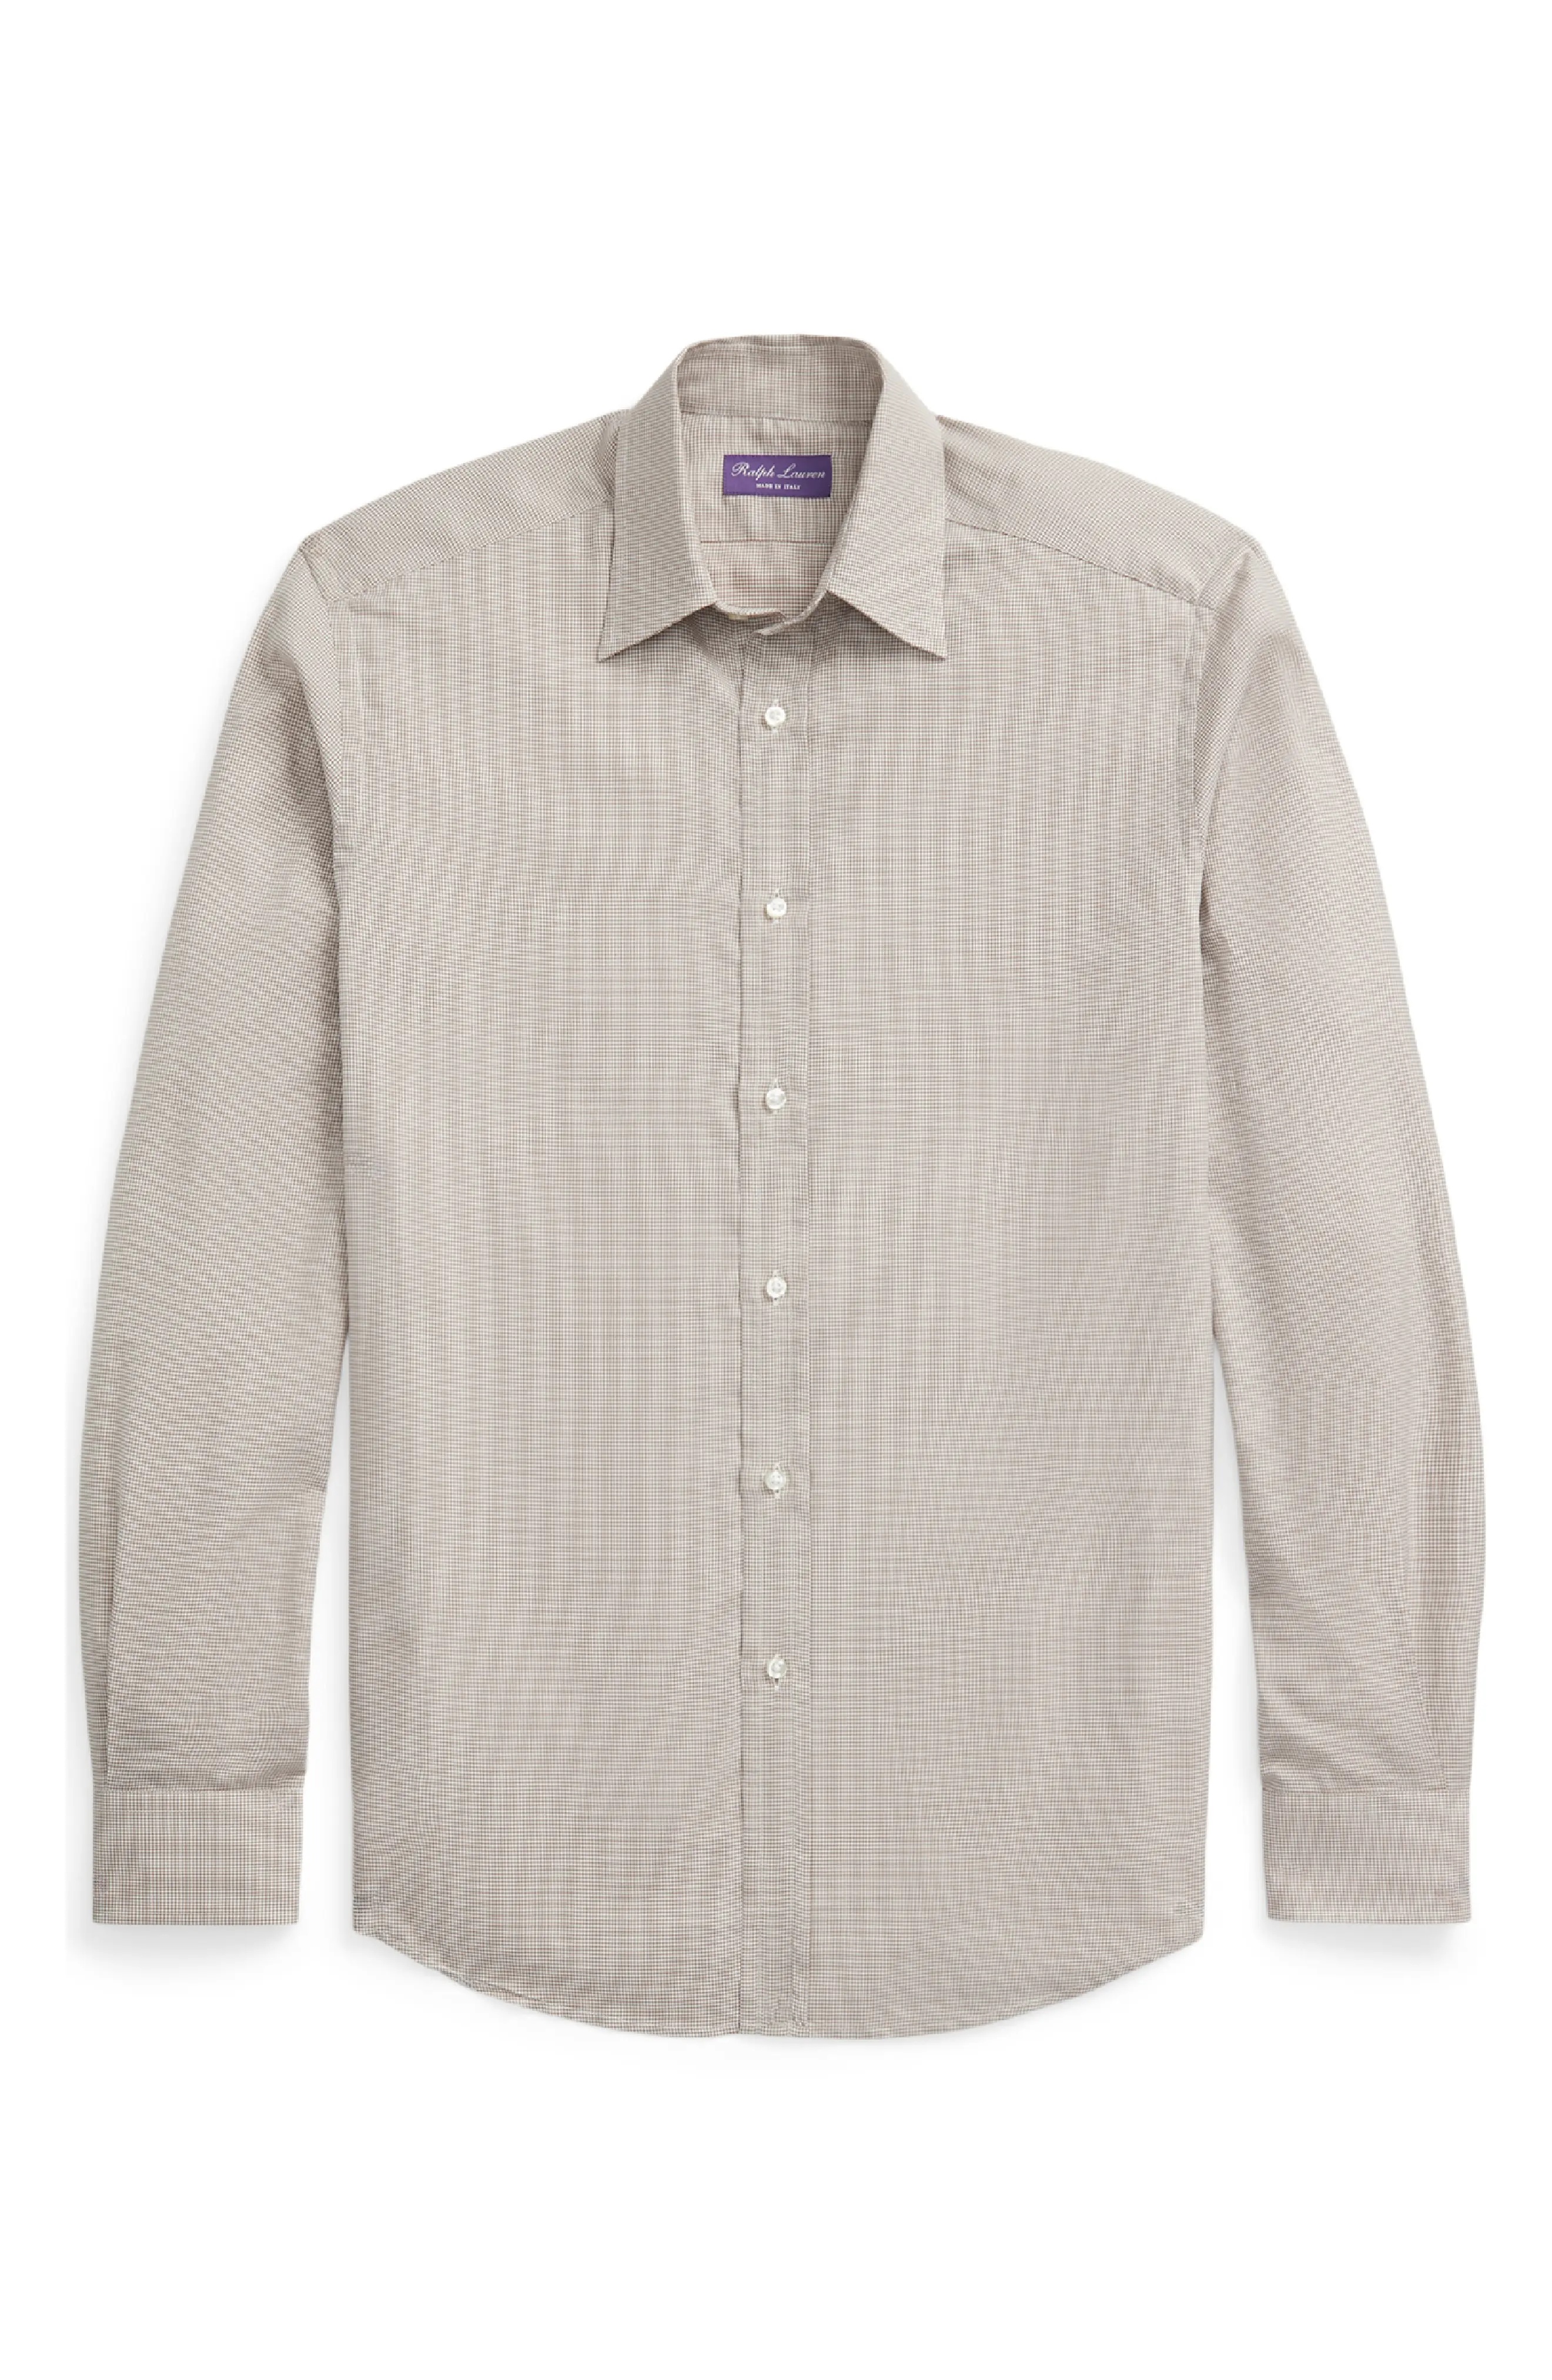 Houndstooth Cotton Twill Button-Up Shirt in Taupe/Cream - 5